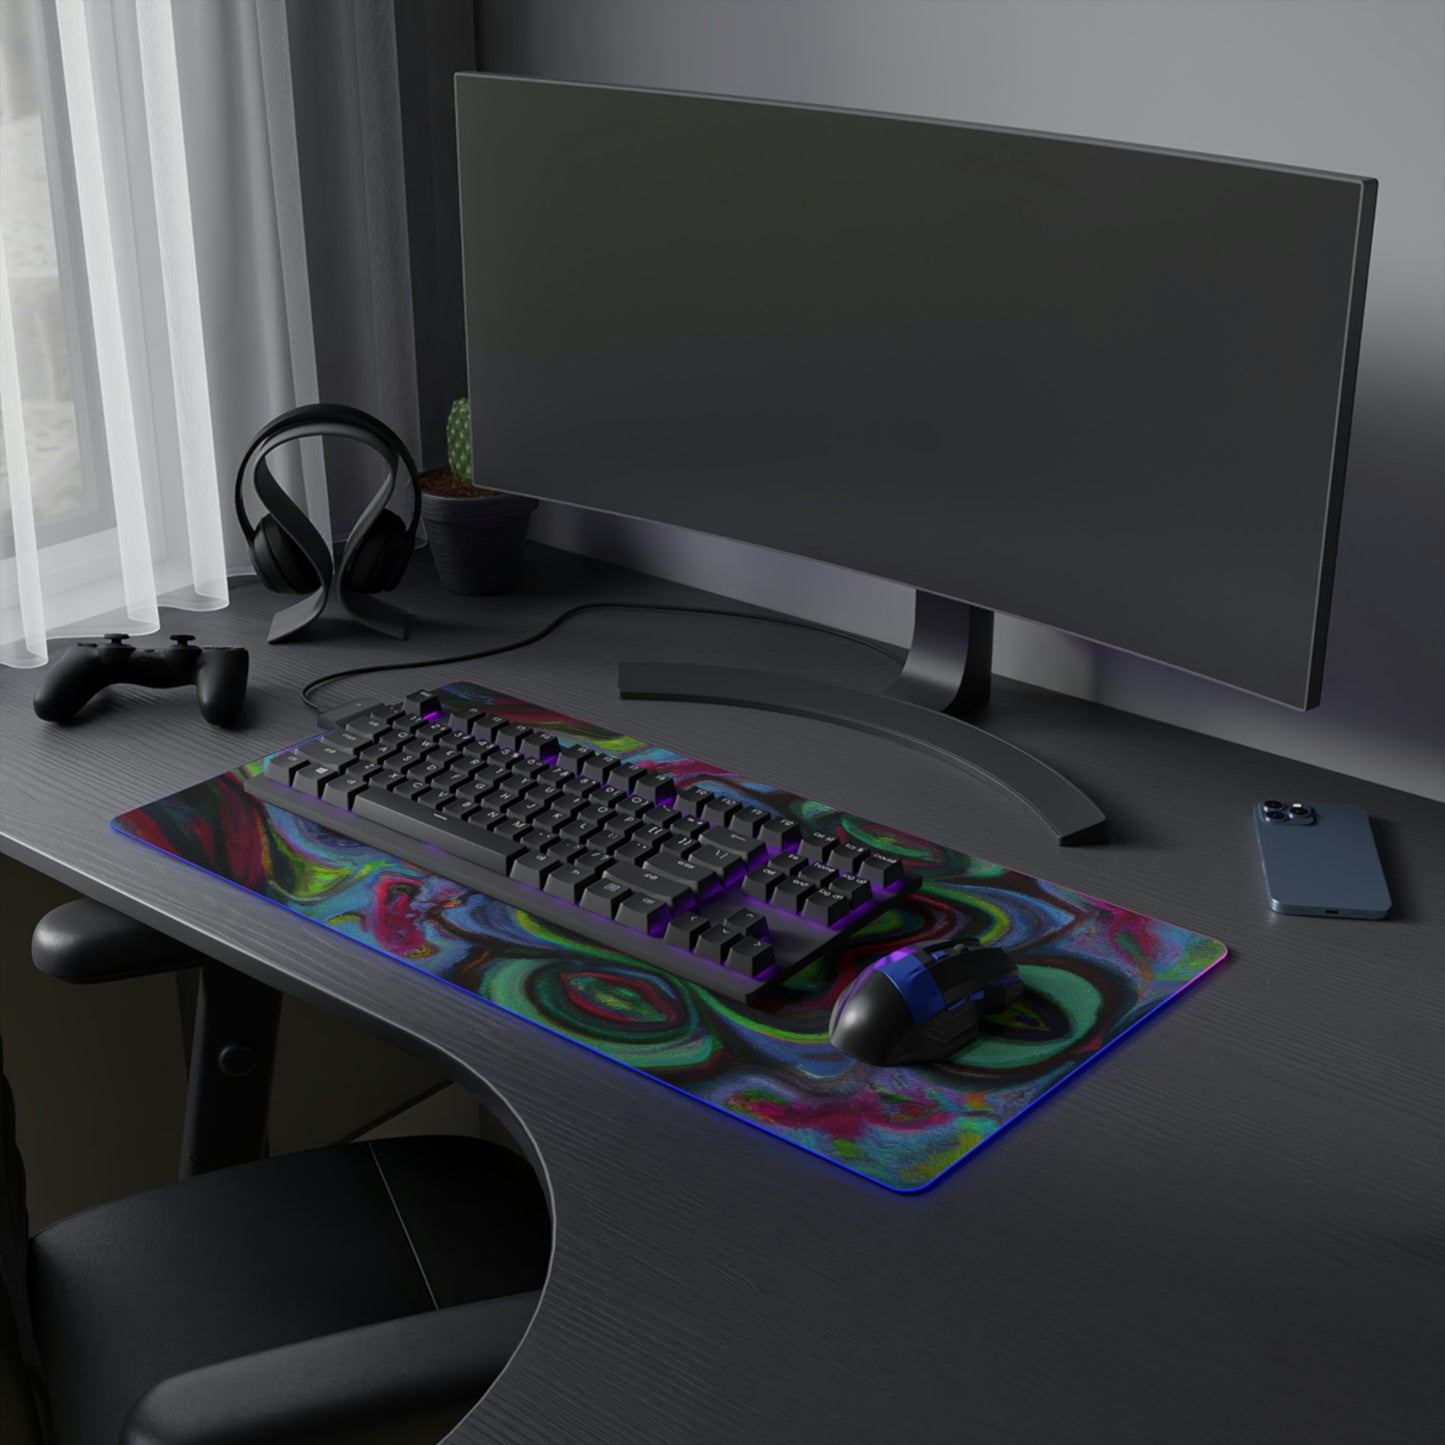 Marty Marauder - Psychedelic Trippy LED Light Up Gaming Mouse Pad